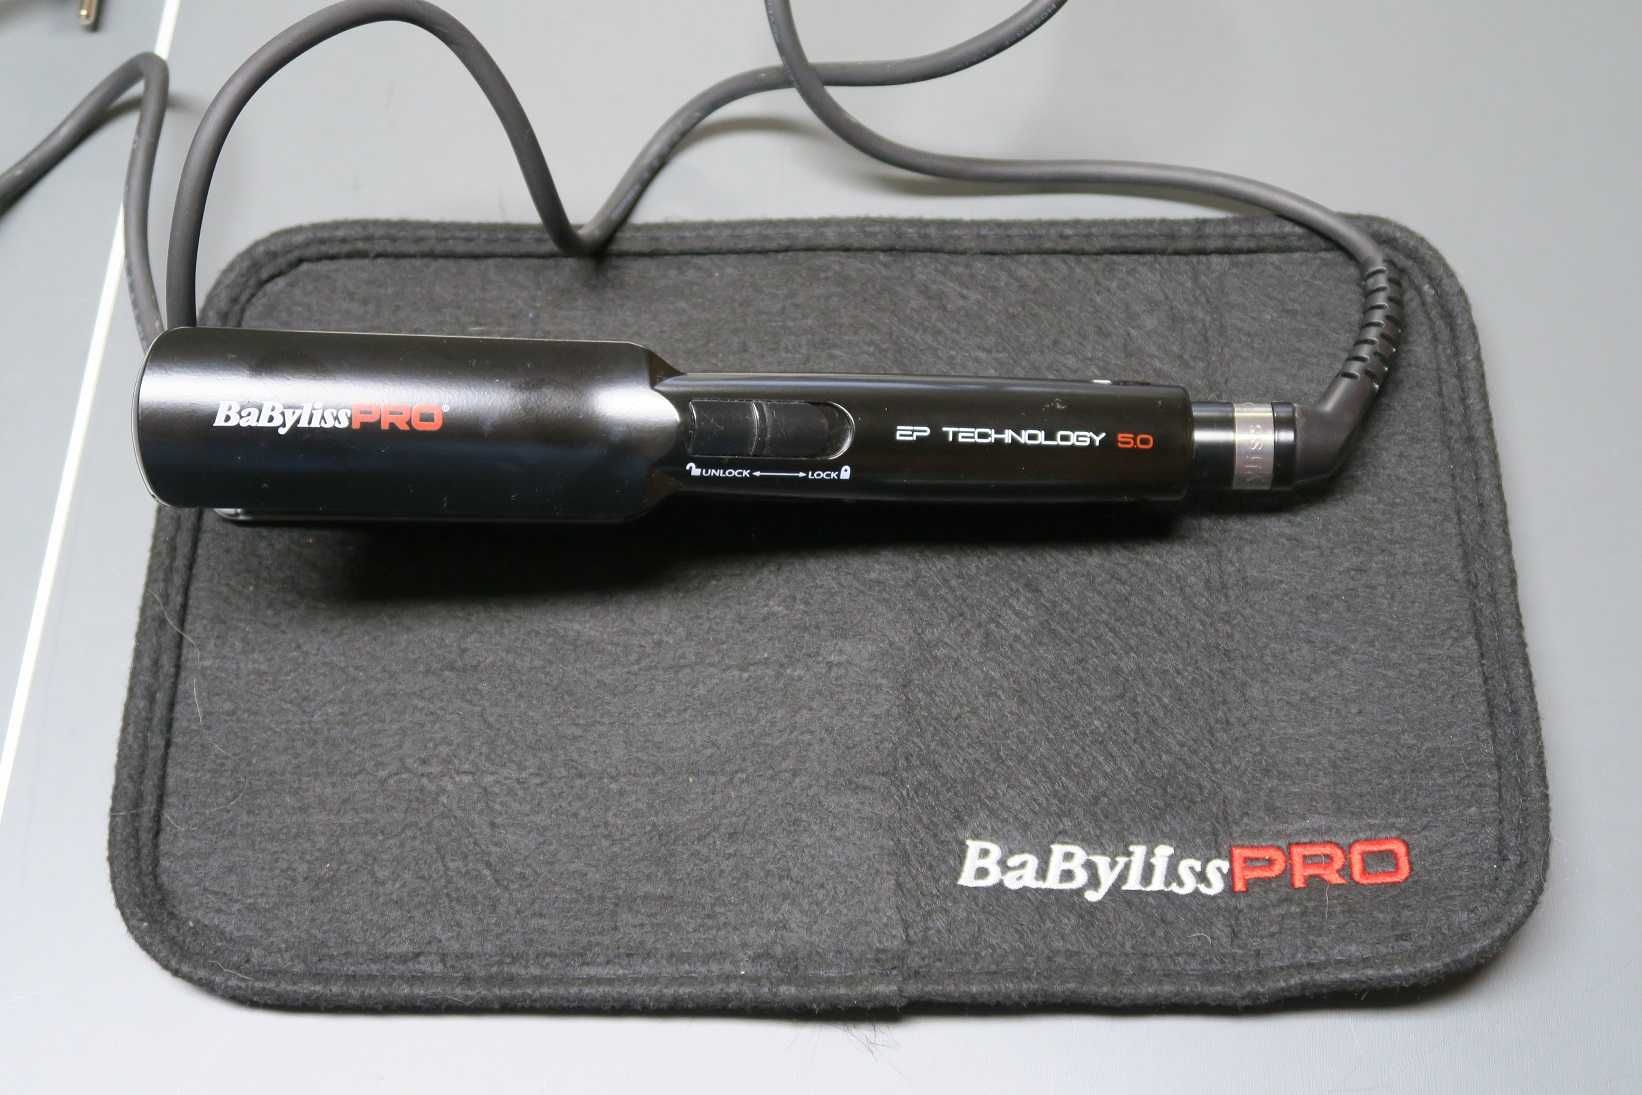 karbownica Babyliss Pro EP Technology 5.0